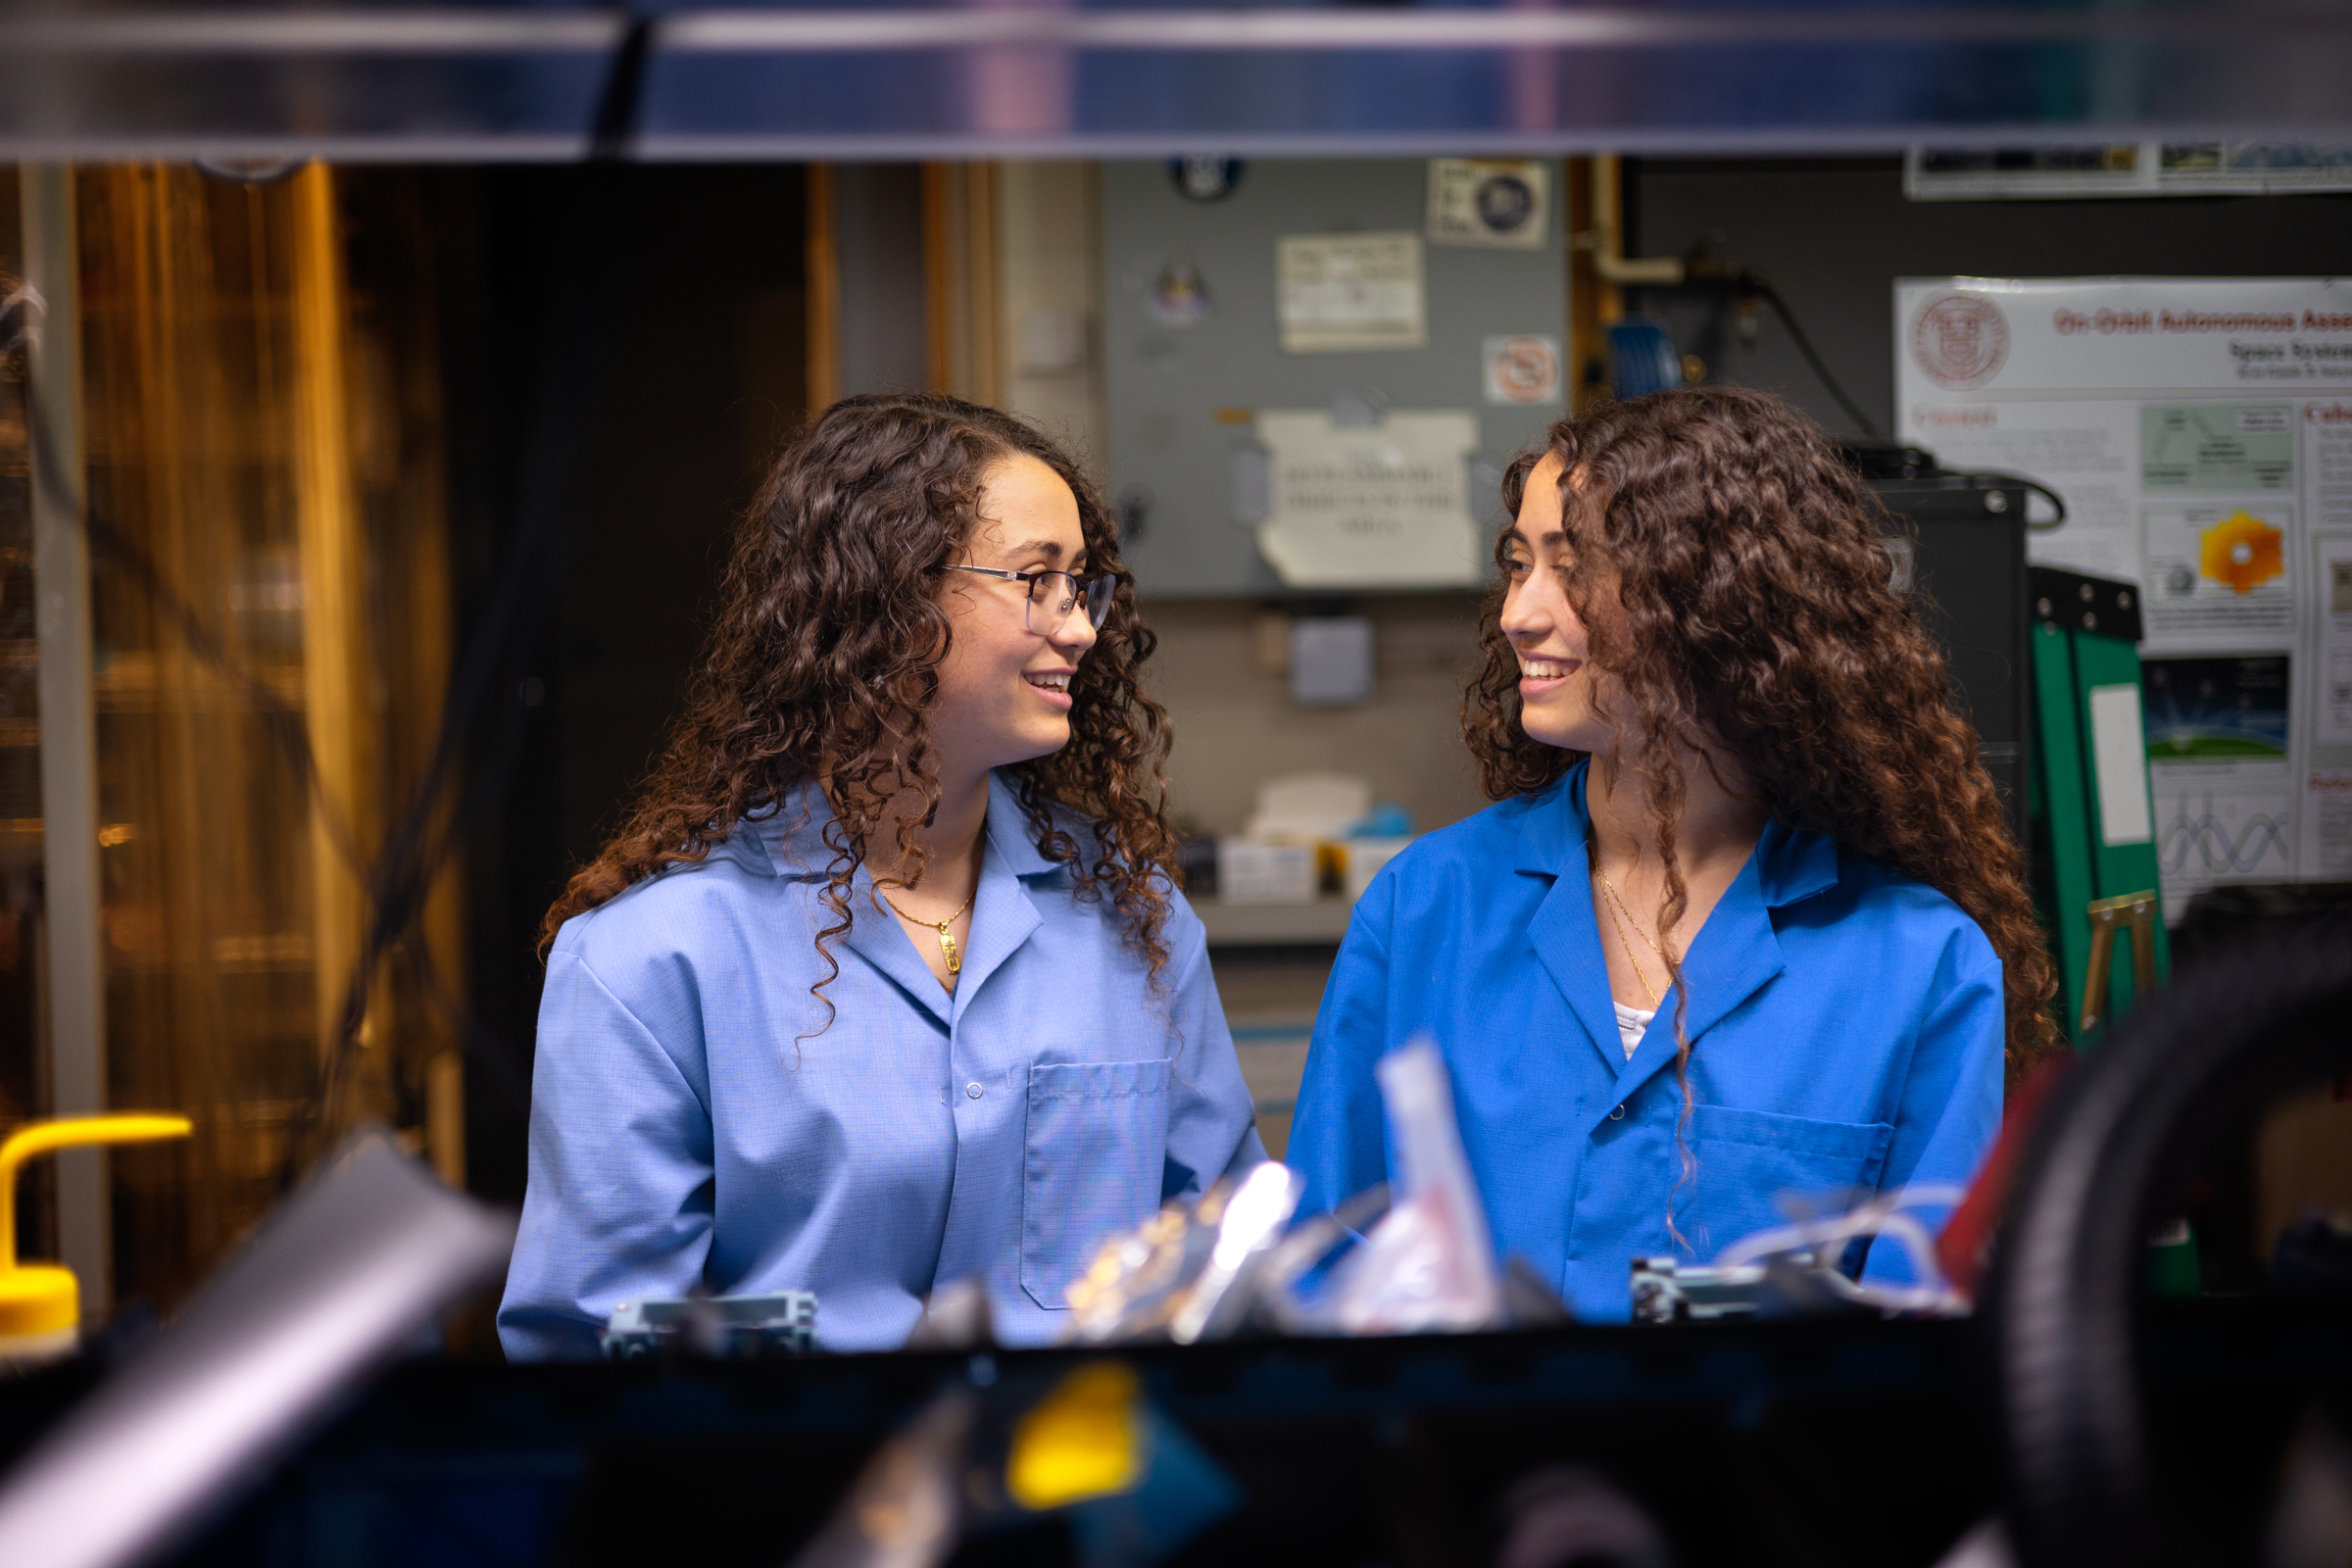 Twin sisters and mechanical engineering majors Ashley (L) and Verena (R) Padres, both class of 2026, chat at Verena's workbench in the Space Systems Design Studio Lab, Rhodes Hall.